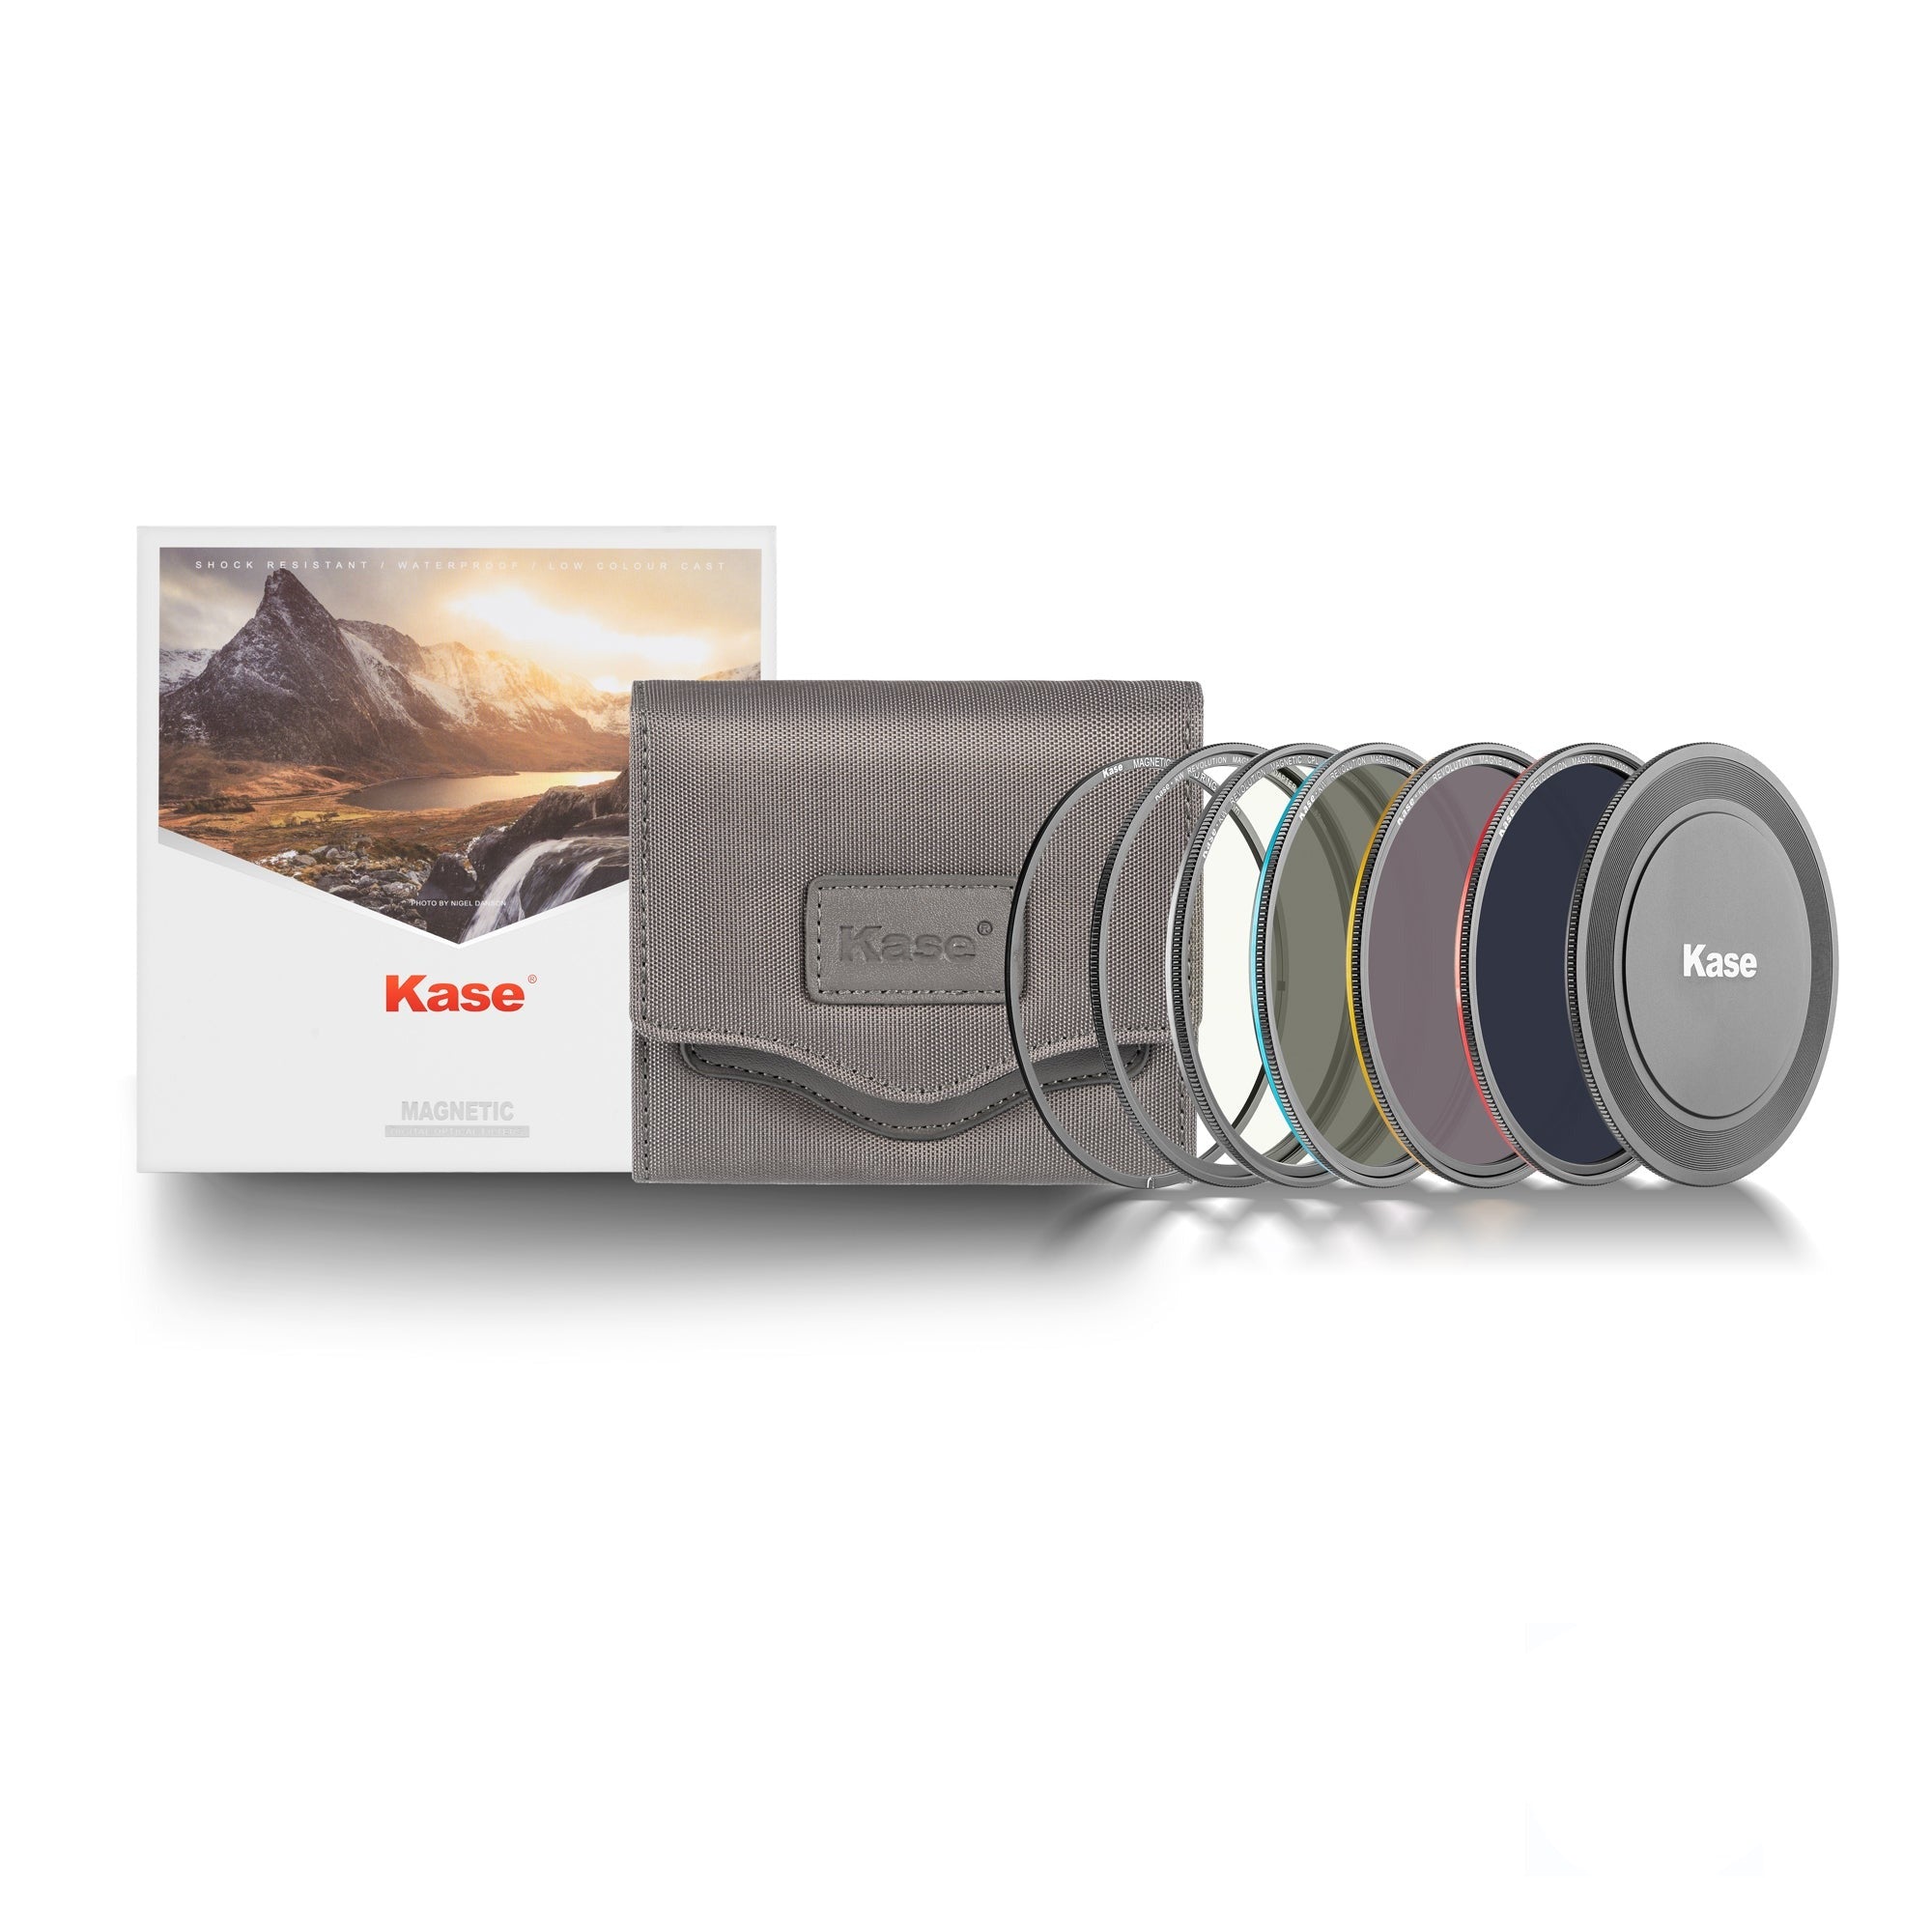 Product Image of KASE REVOLUTION MAGNETIC CIRCULAR FILTERS 95MM PRO KIT